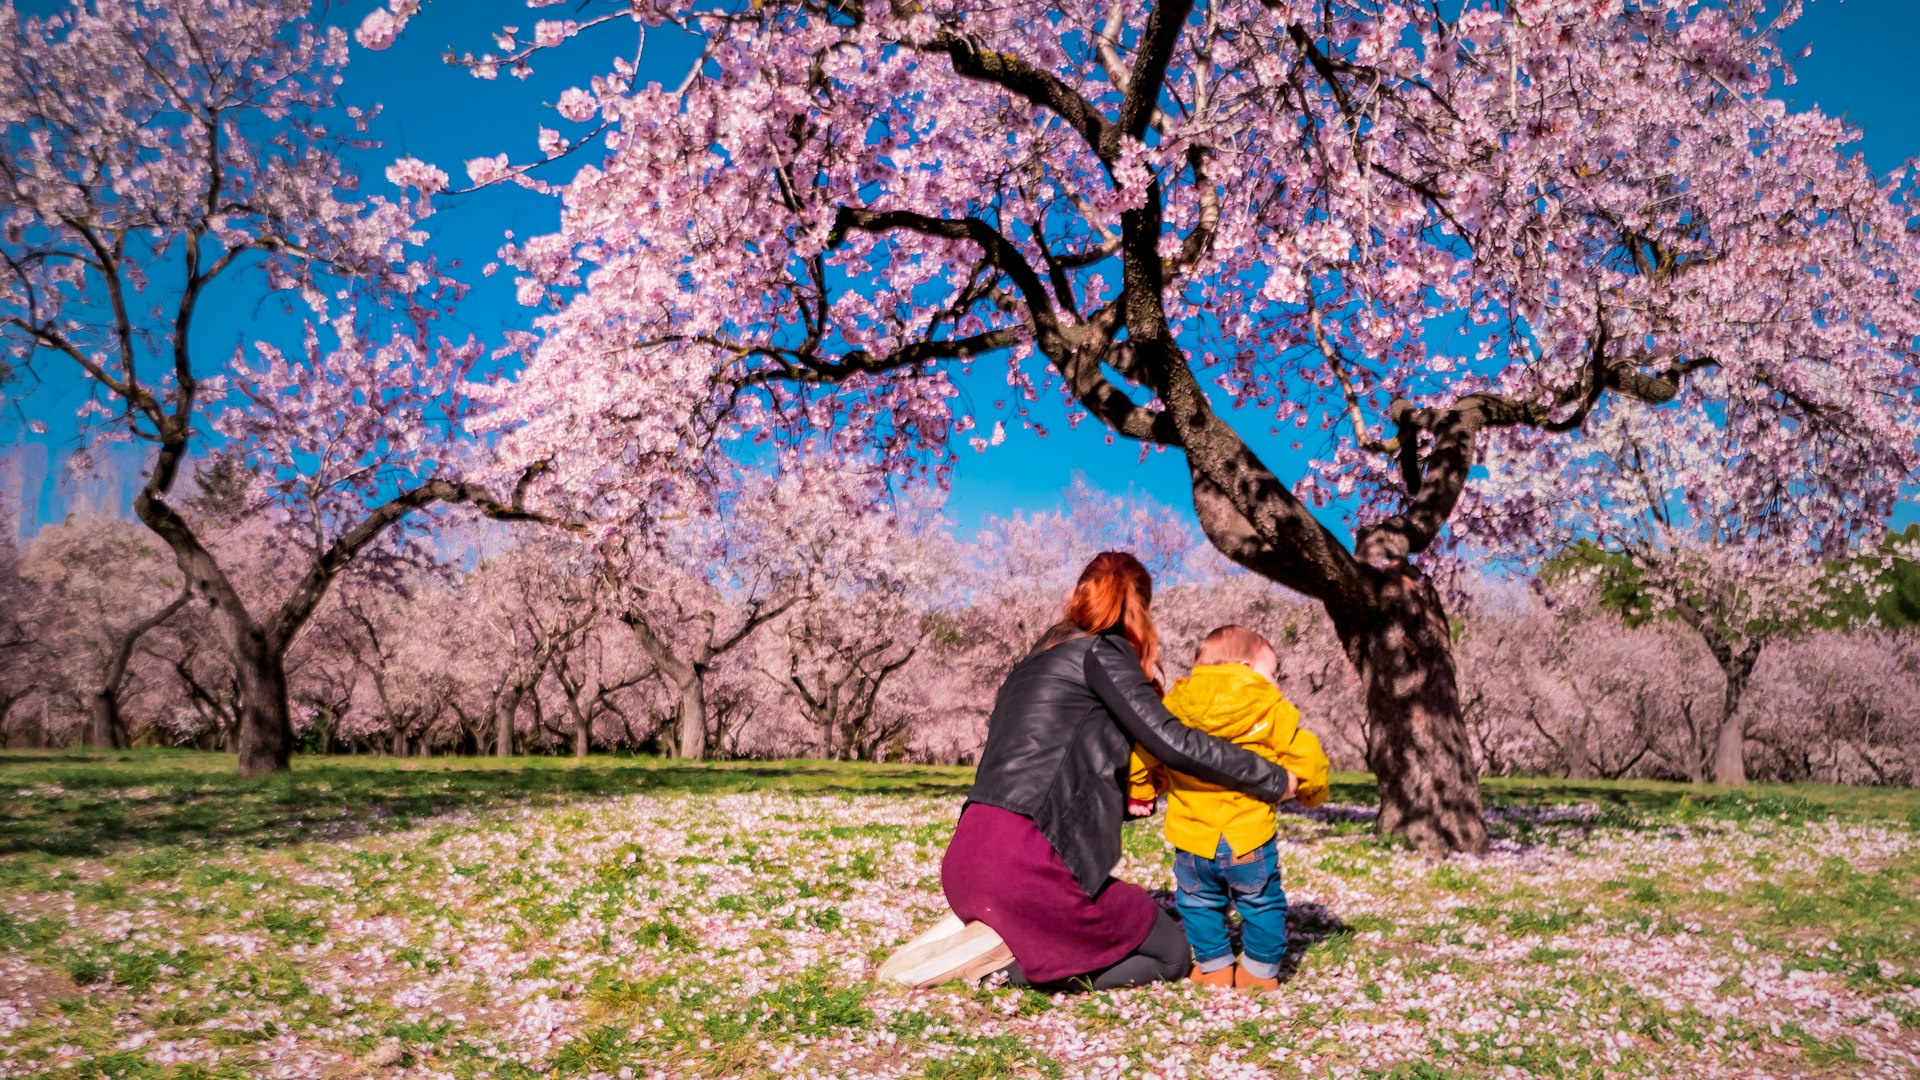 A mother and baby kneel down in vibrant pink blossom under a tree in a park